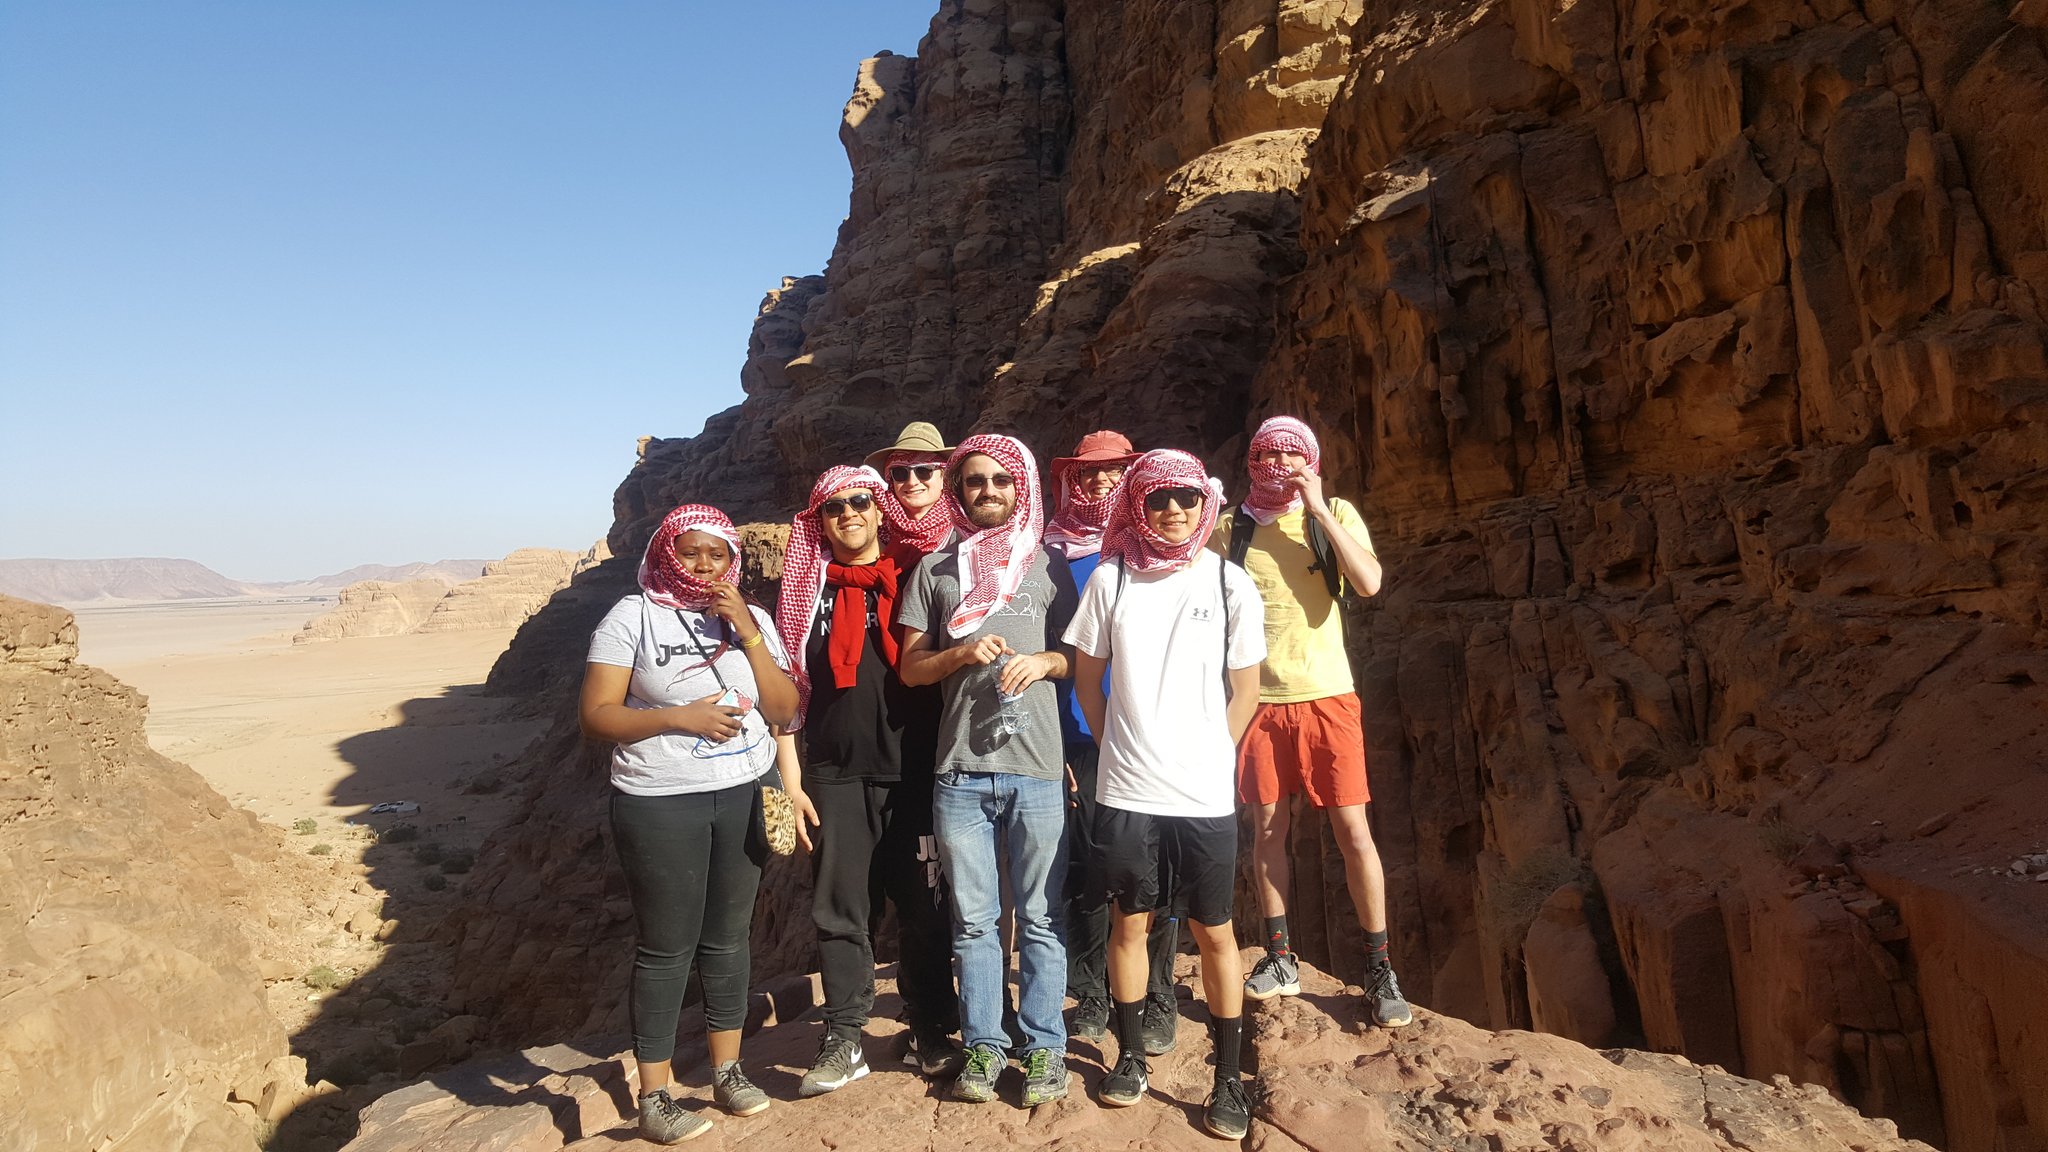 In addition to learning dynamic programming problem-solving strategies at Princess Sumaya University for Technology, the five Nebraska students also visited local world heritage sites and participated in cultural workshops. (Photo from Tareq Daher)